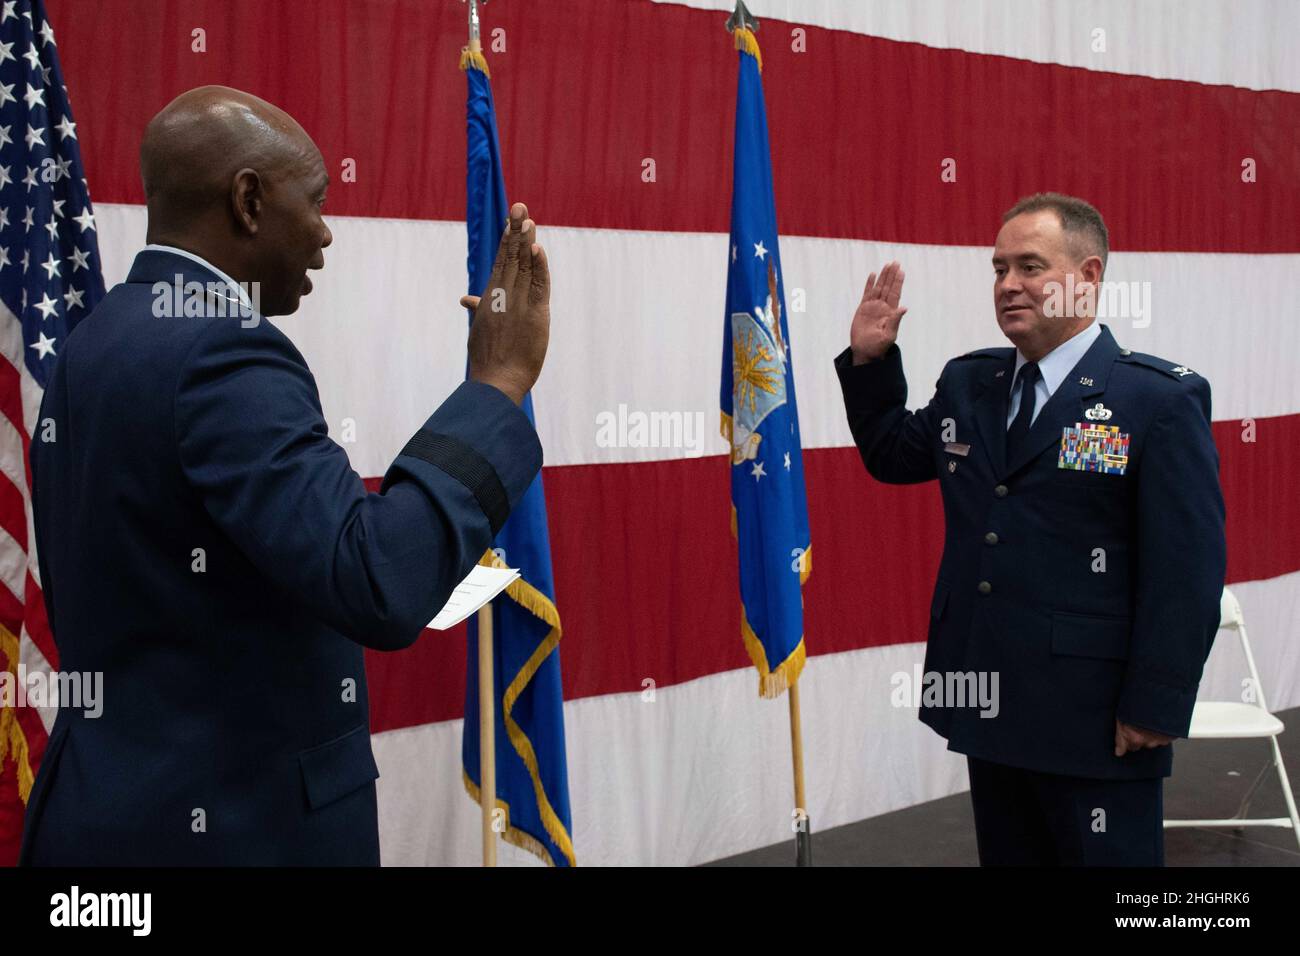 Col. Brian Gunderson reaffirms his oath to the Constitution of the United States during his promotion ceremony at the Nevada Air National Guard Base in Reno, Nev., Aug. 7, 2021. Stock Photo